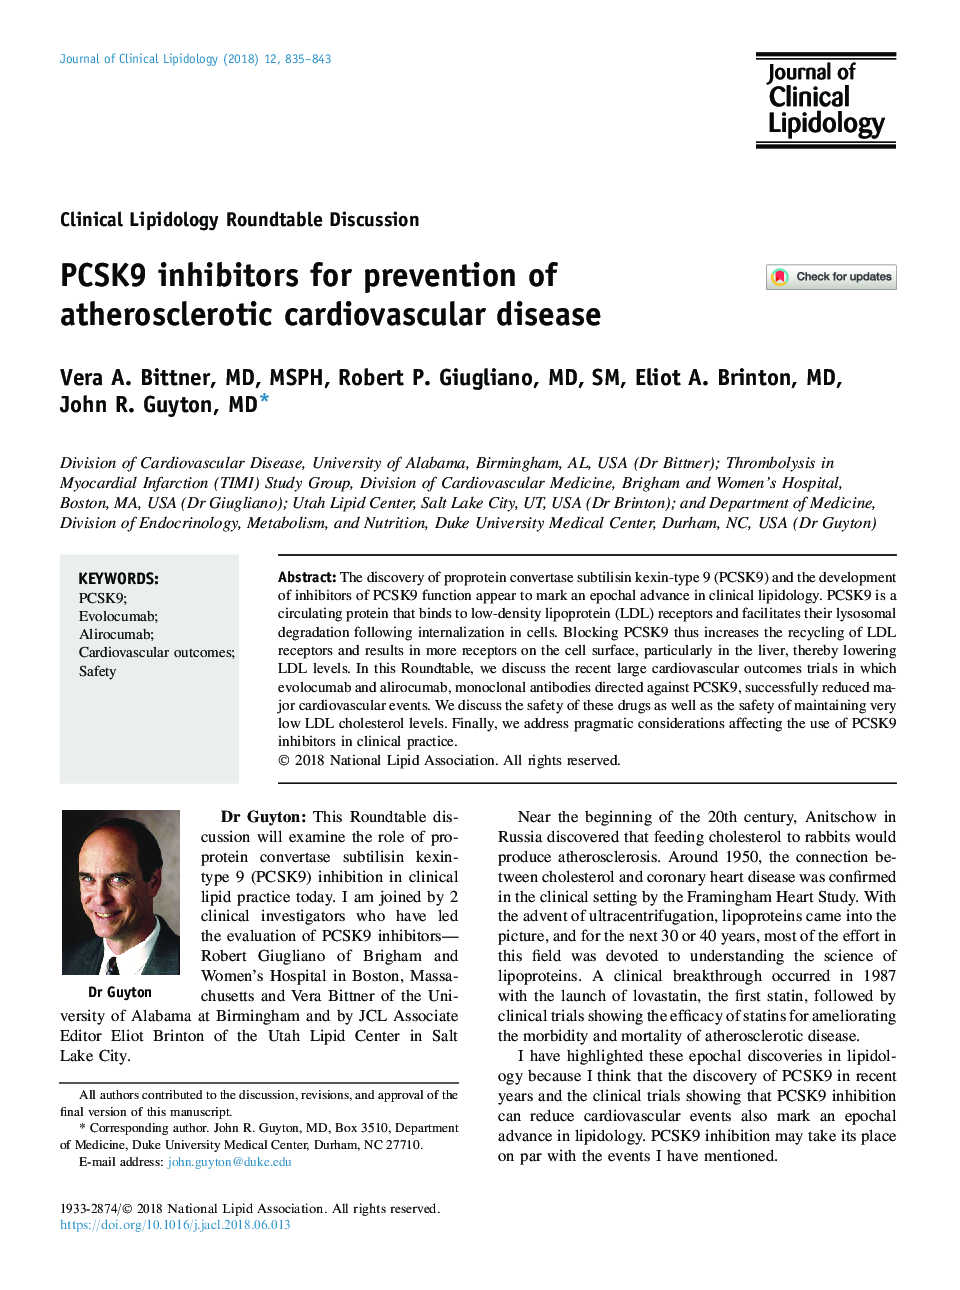 PCSK9 inhibitors for prevention of atherosclerotic cardiovascular disease